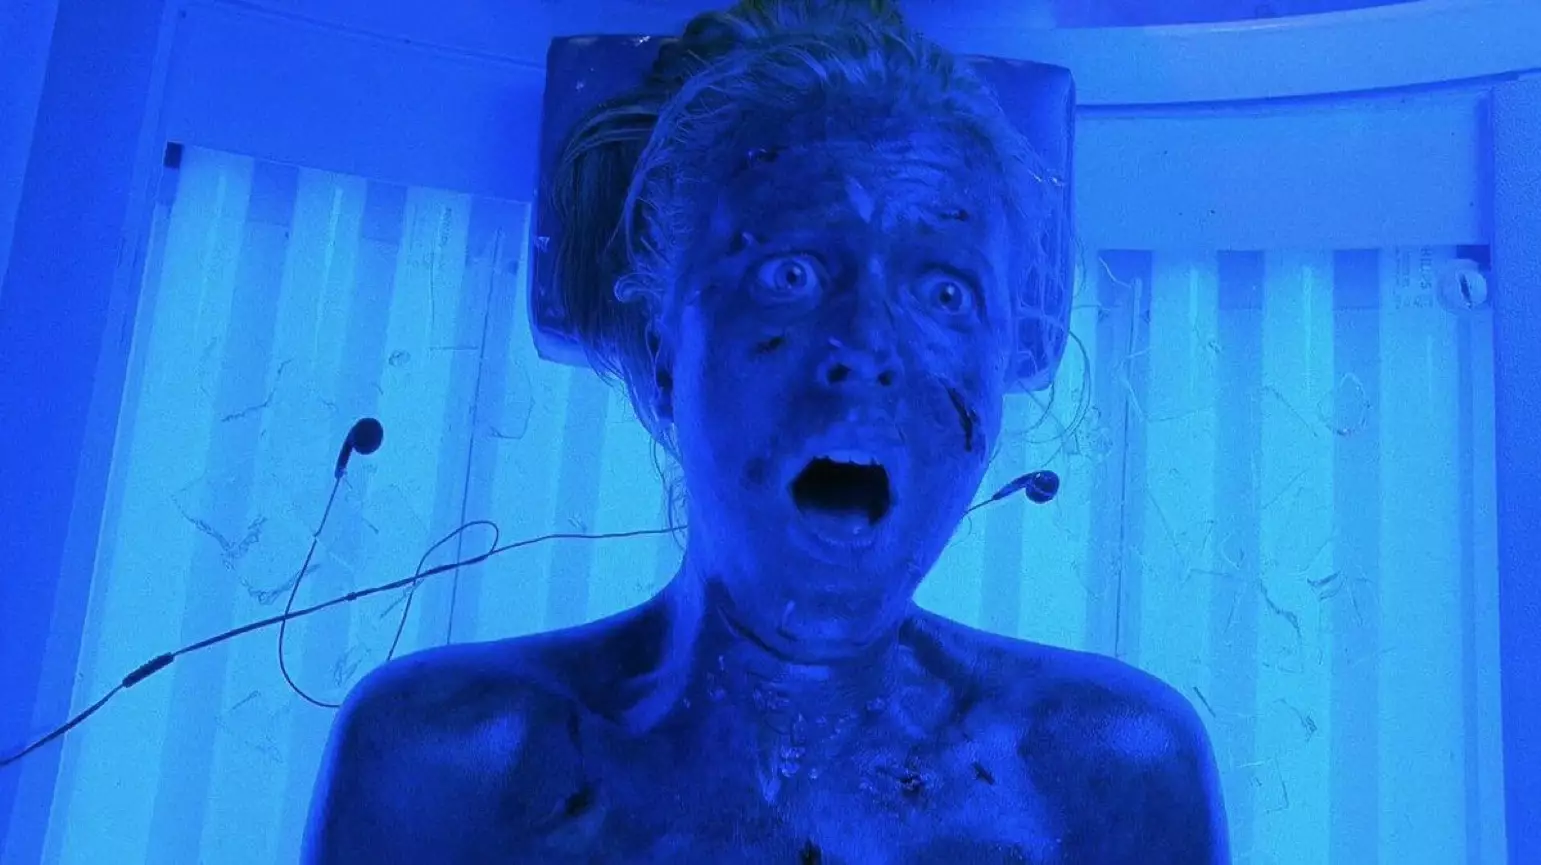 The tanning salon scene in Final Destination 3 is also etched into people's memories.